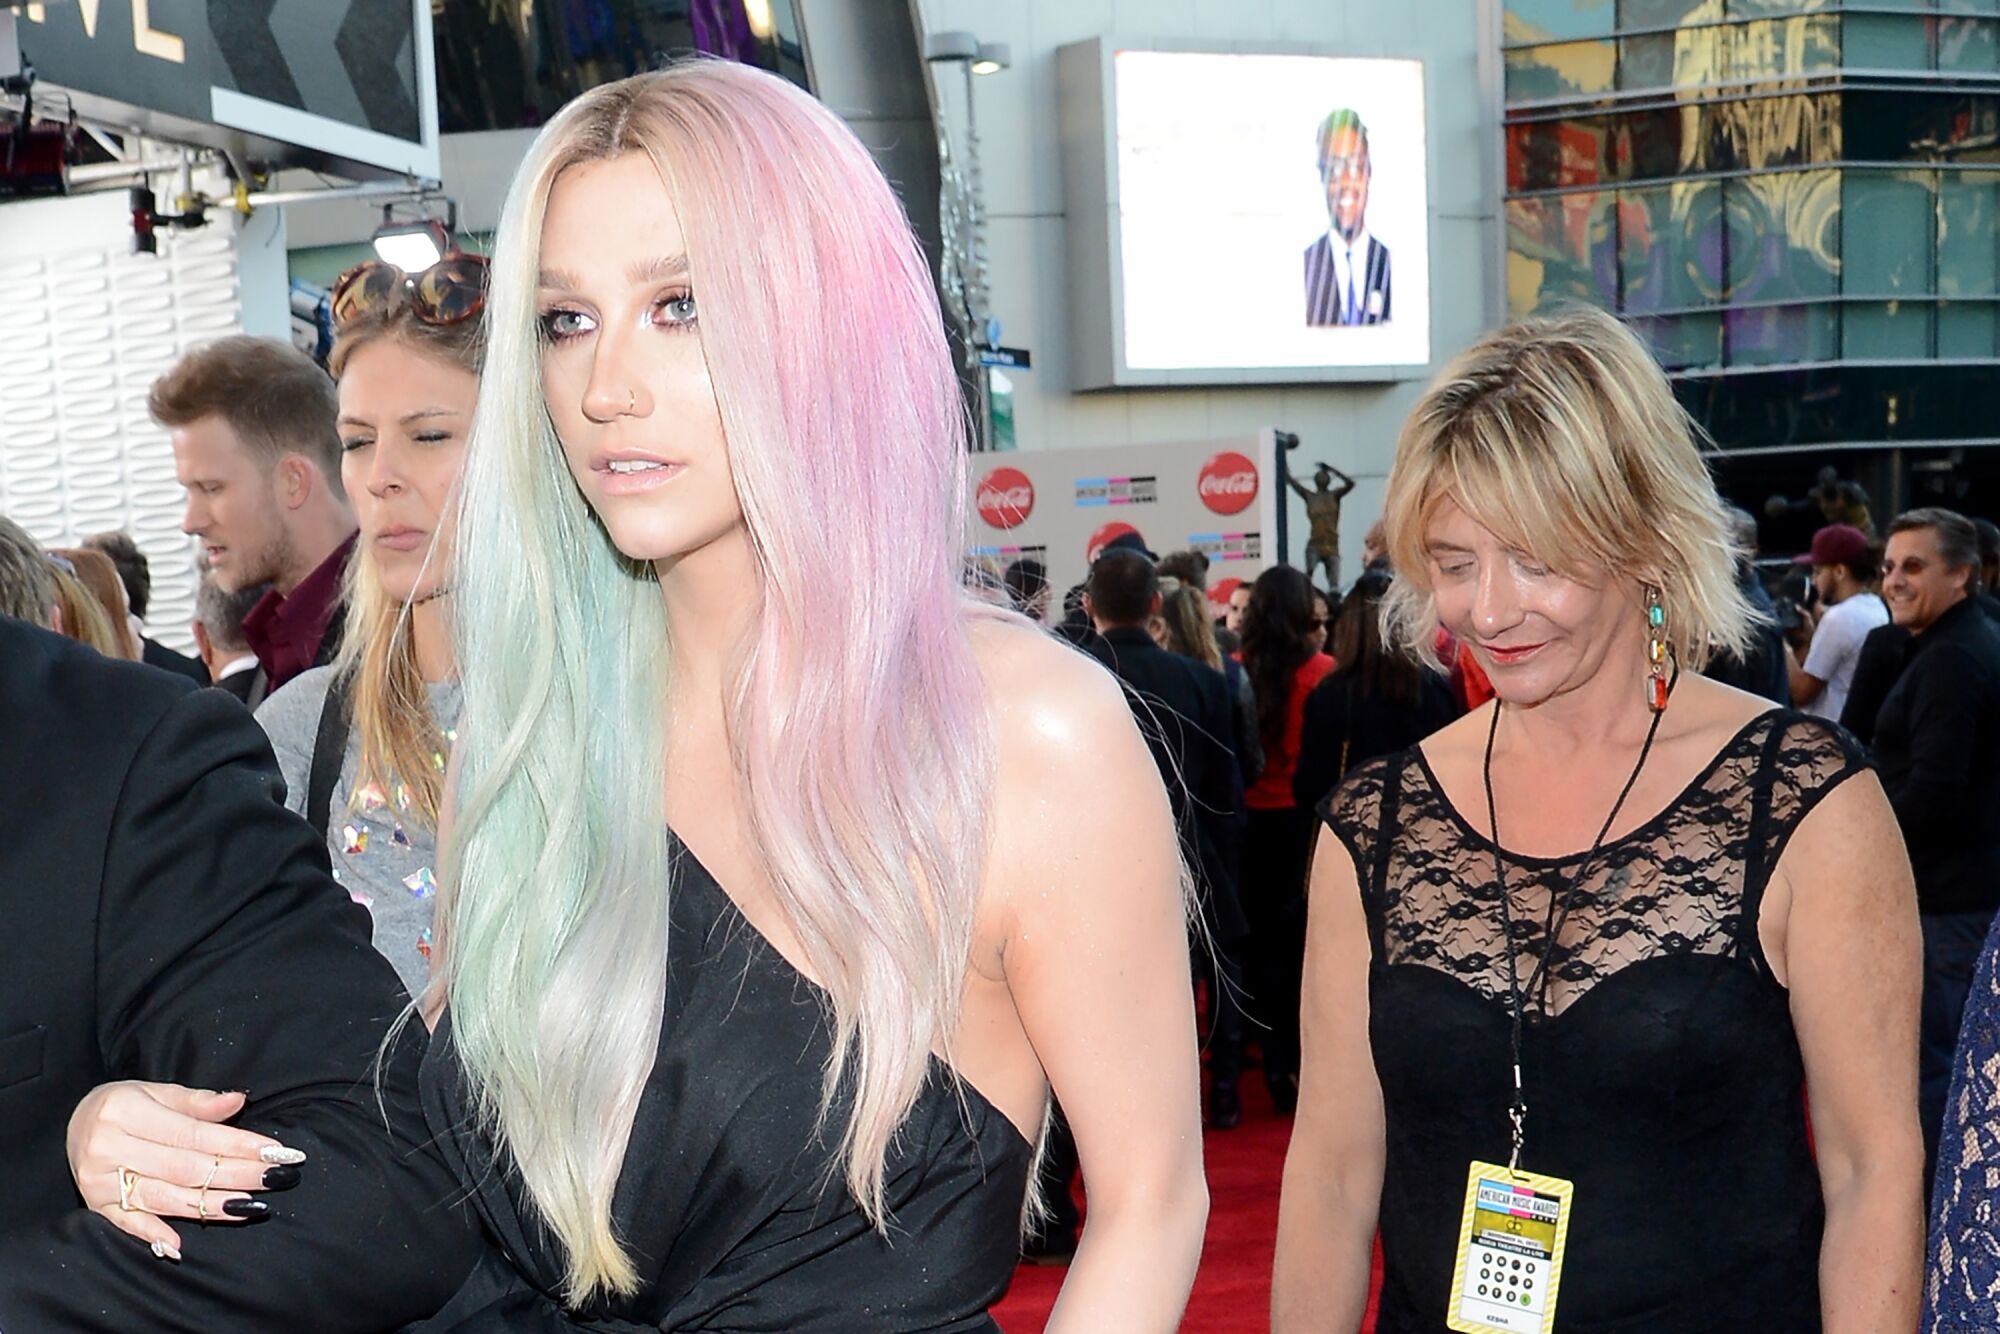 Recording artist Kesha and her mother, Pebe Sebert, attend the 2013 American Music Awards.